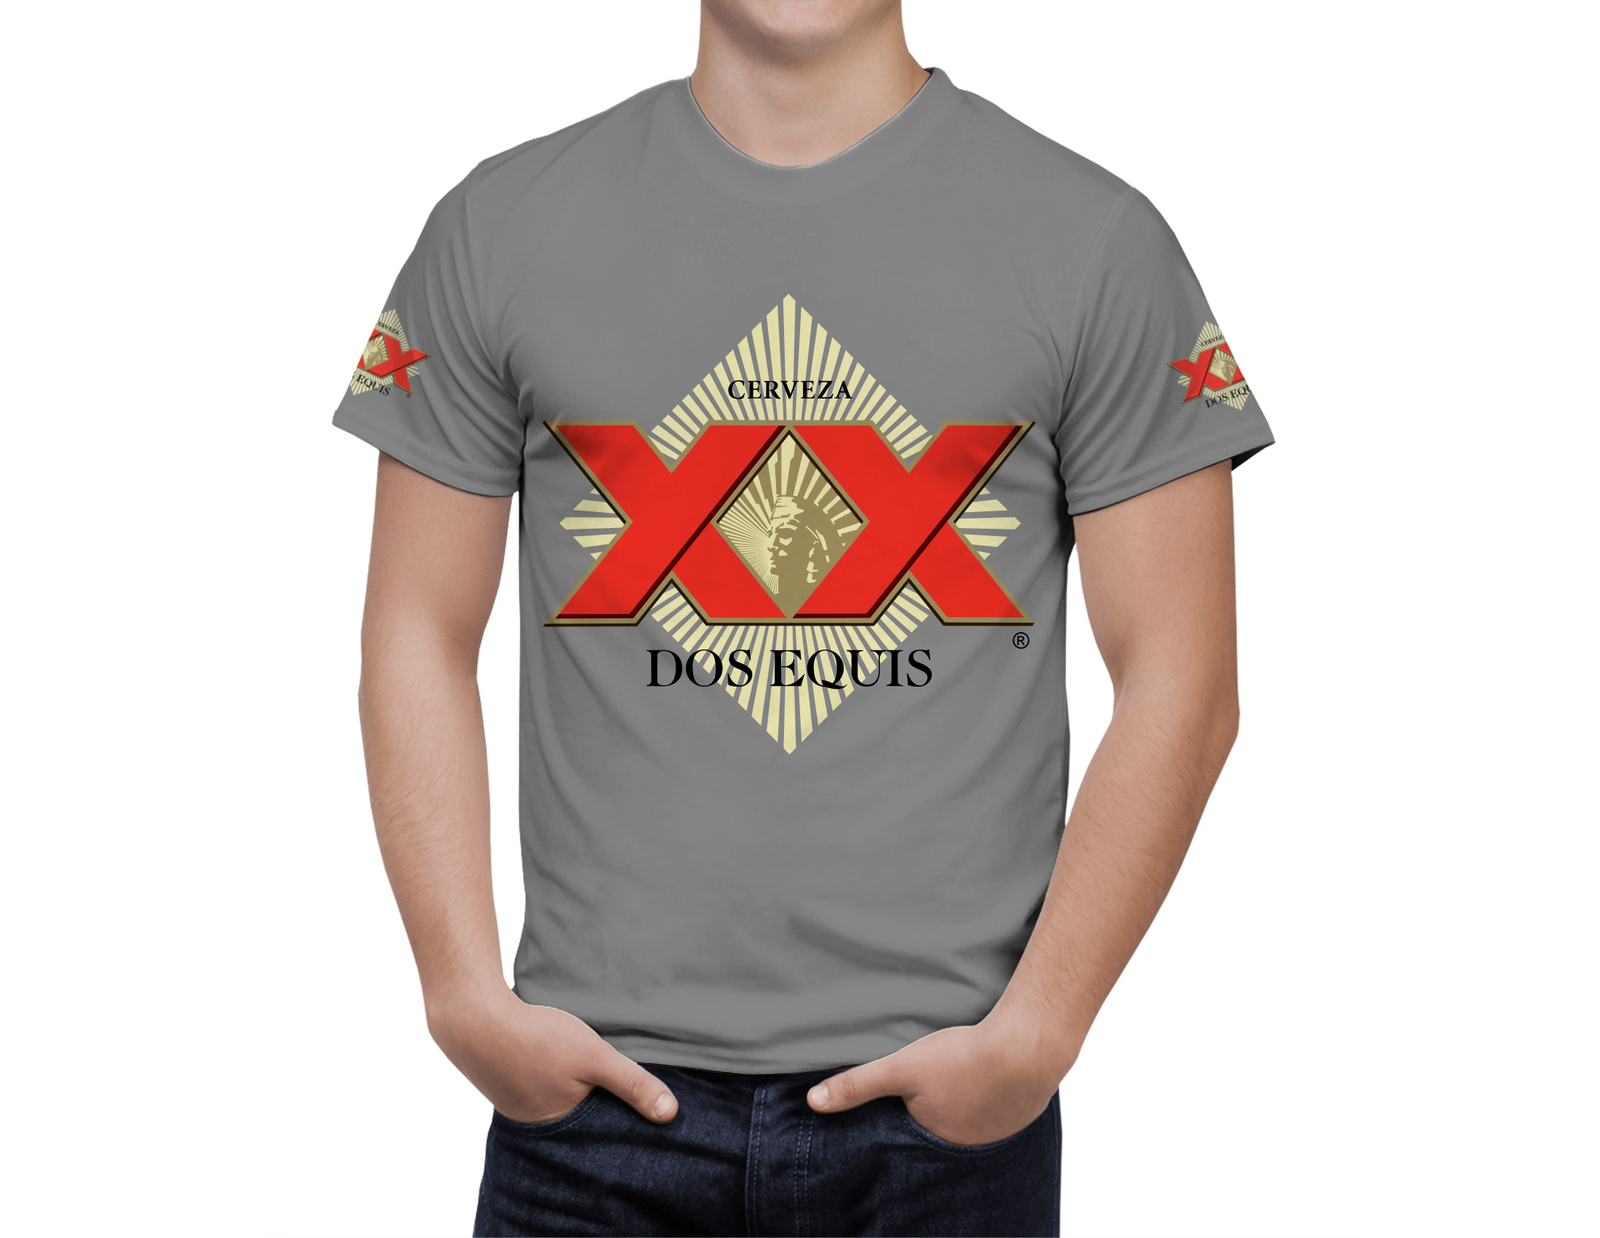 Primary image for Dos Equis Beer Gray T-Shirt, High Quality, Gift Beer Shirt